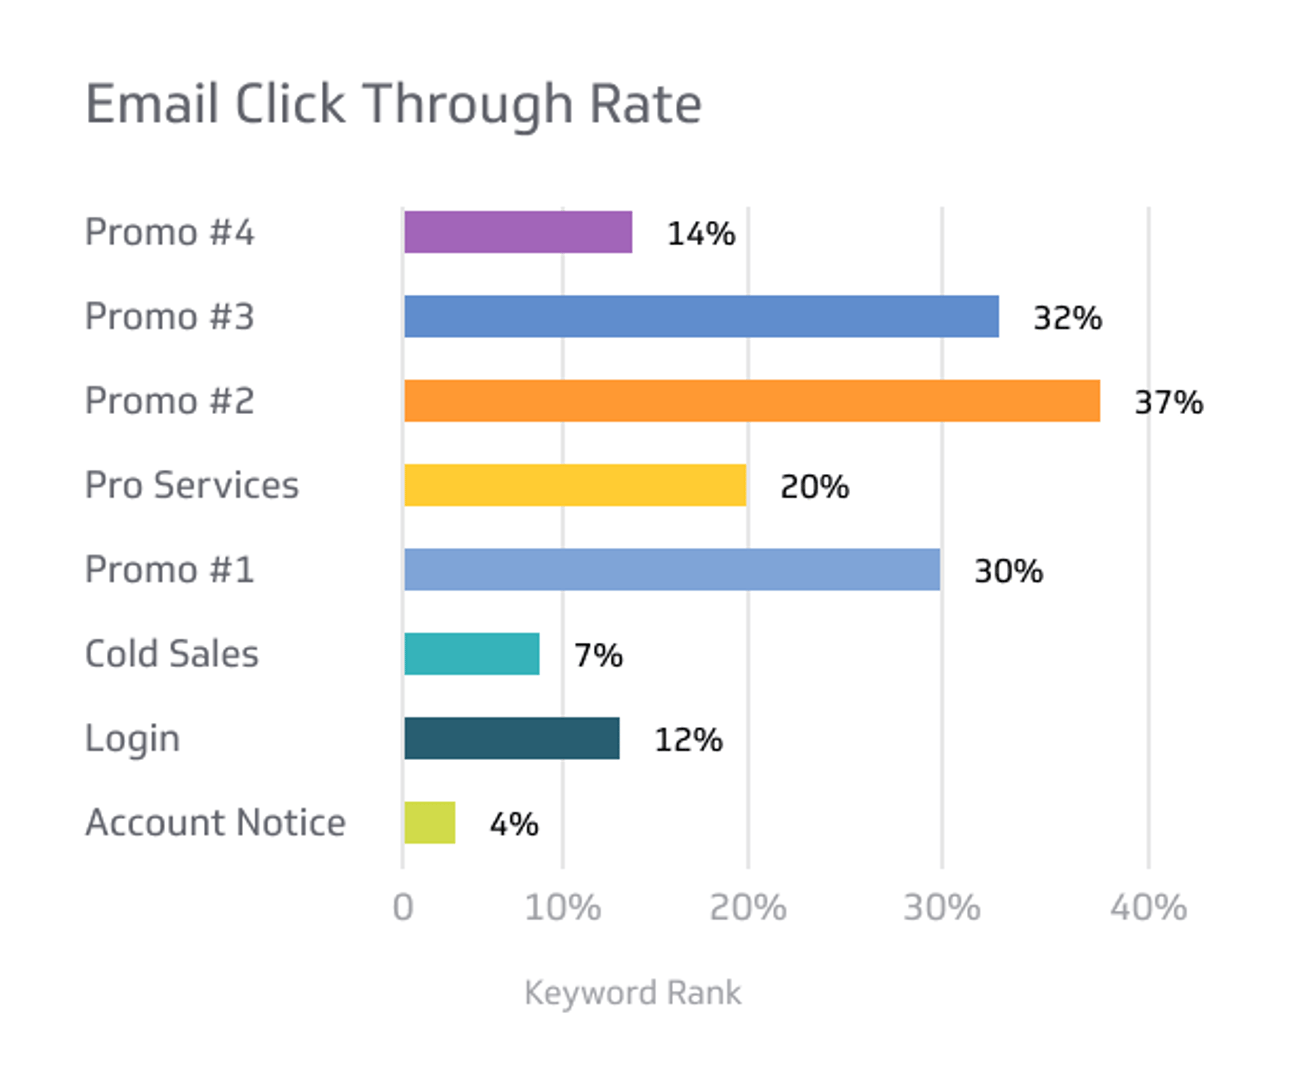 Email Marketing KPI Example - Email Click Through Rate (CTR) Metric